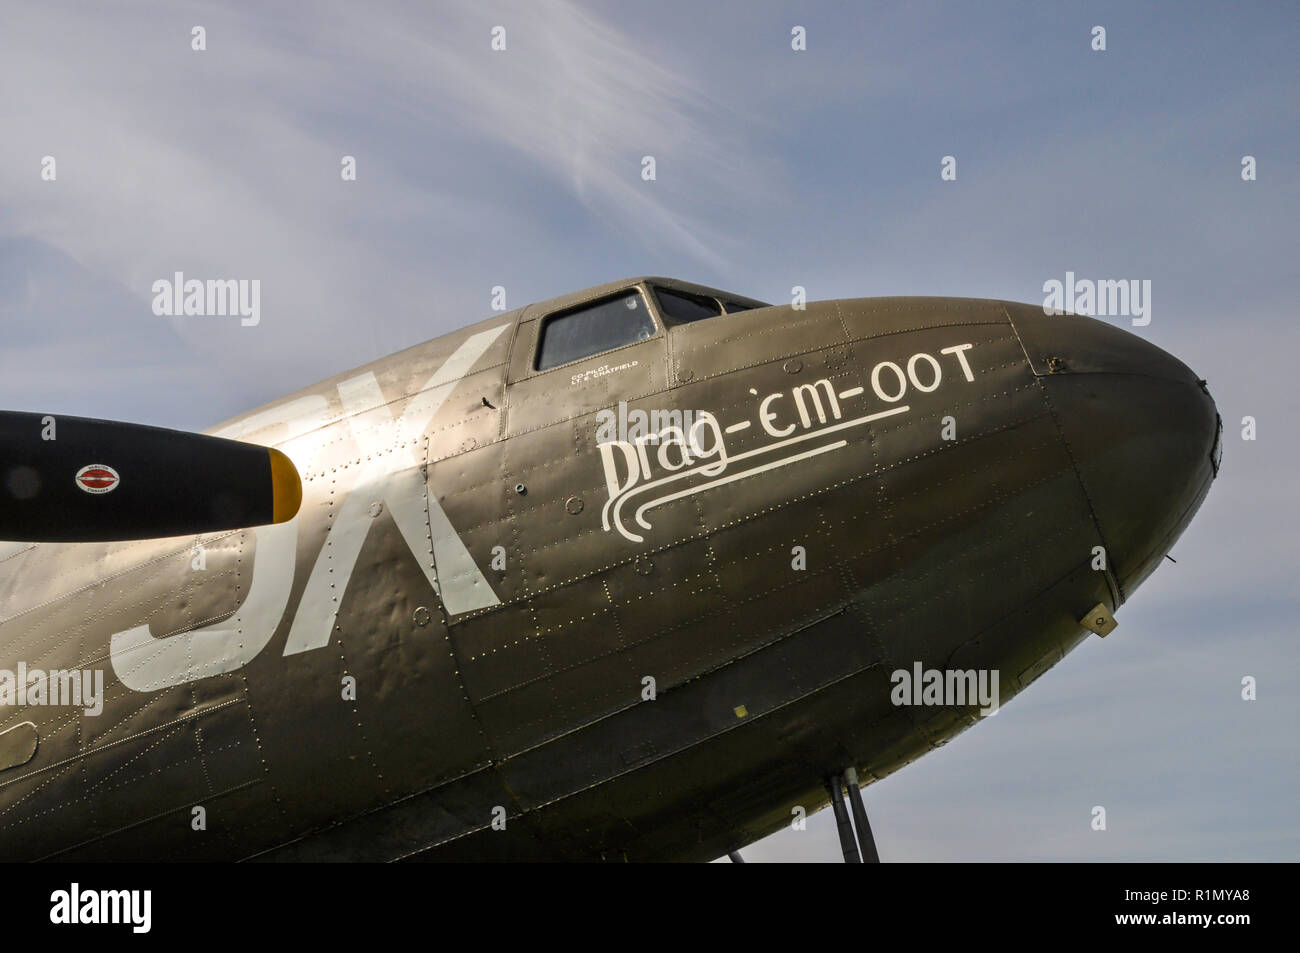 Douglas C-47 Skytrain, Dakota named Drag em oot. D-Day veteran plane served with US Army Air Force dropping paratroops at St Mere Eglise near Normandy Stock Photo